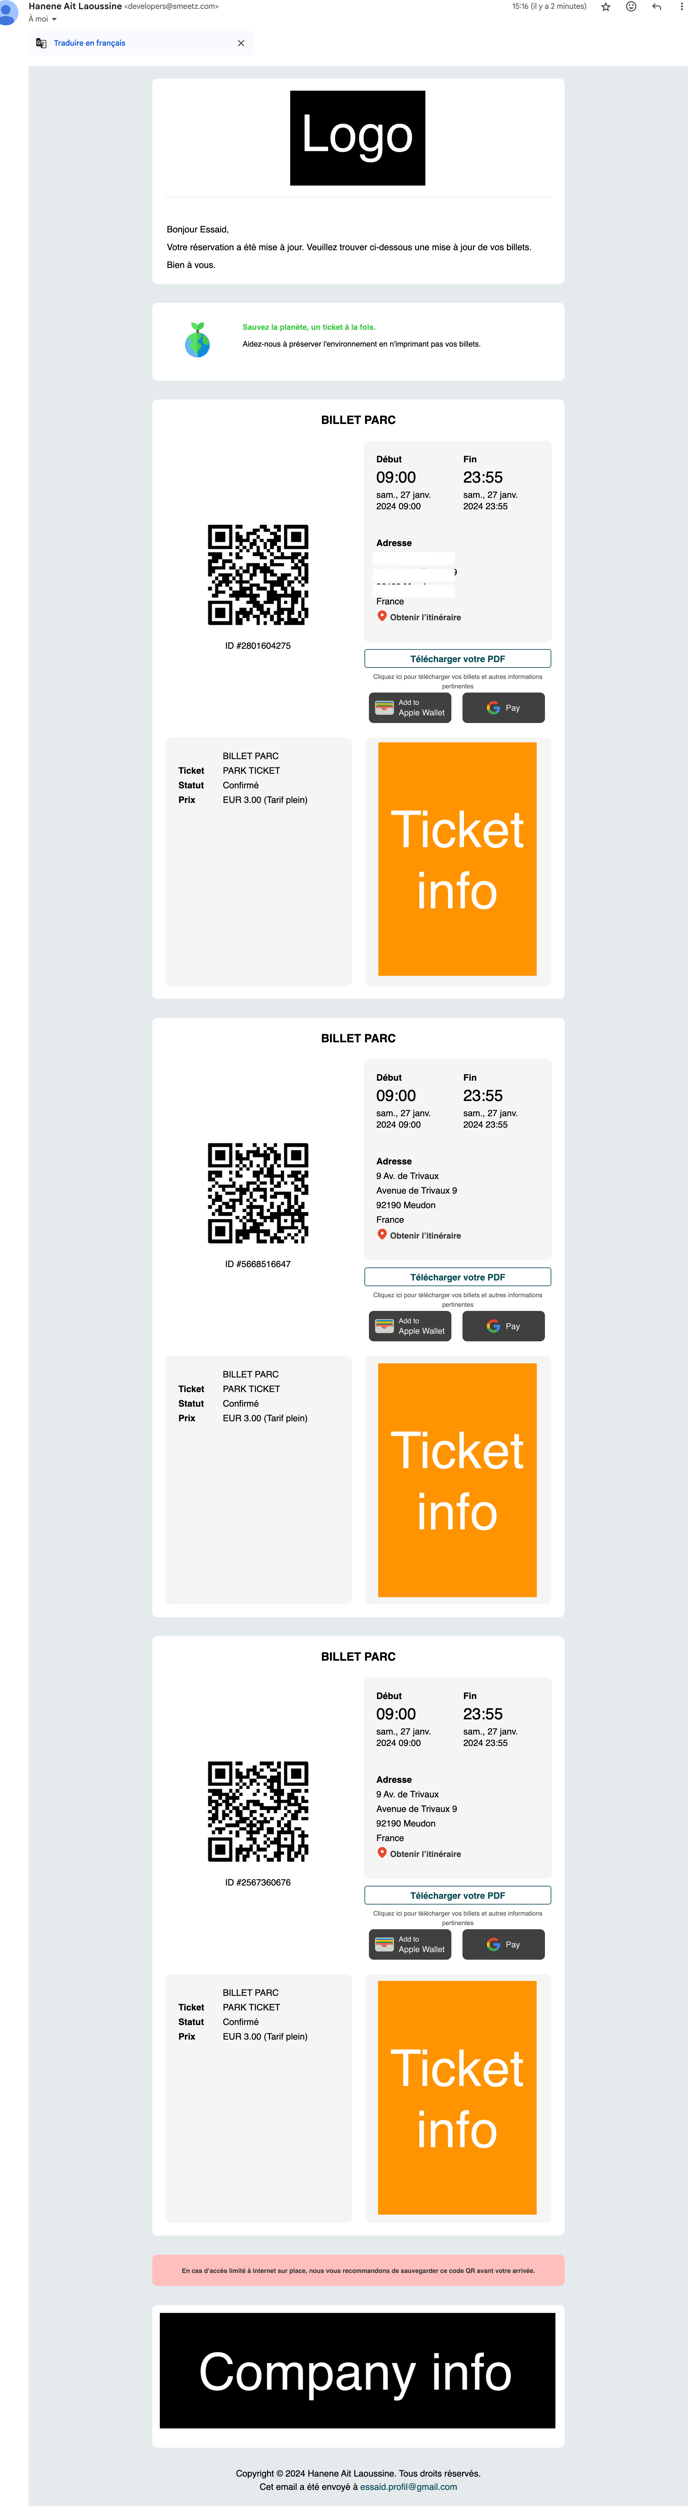 Only-ticket-email-1